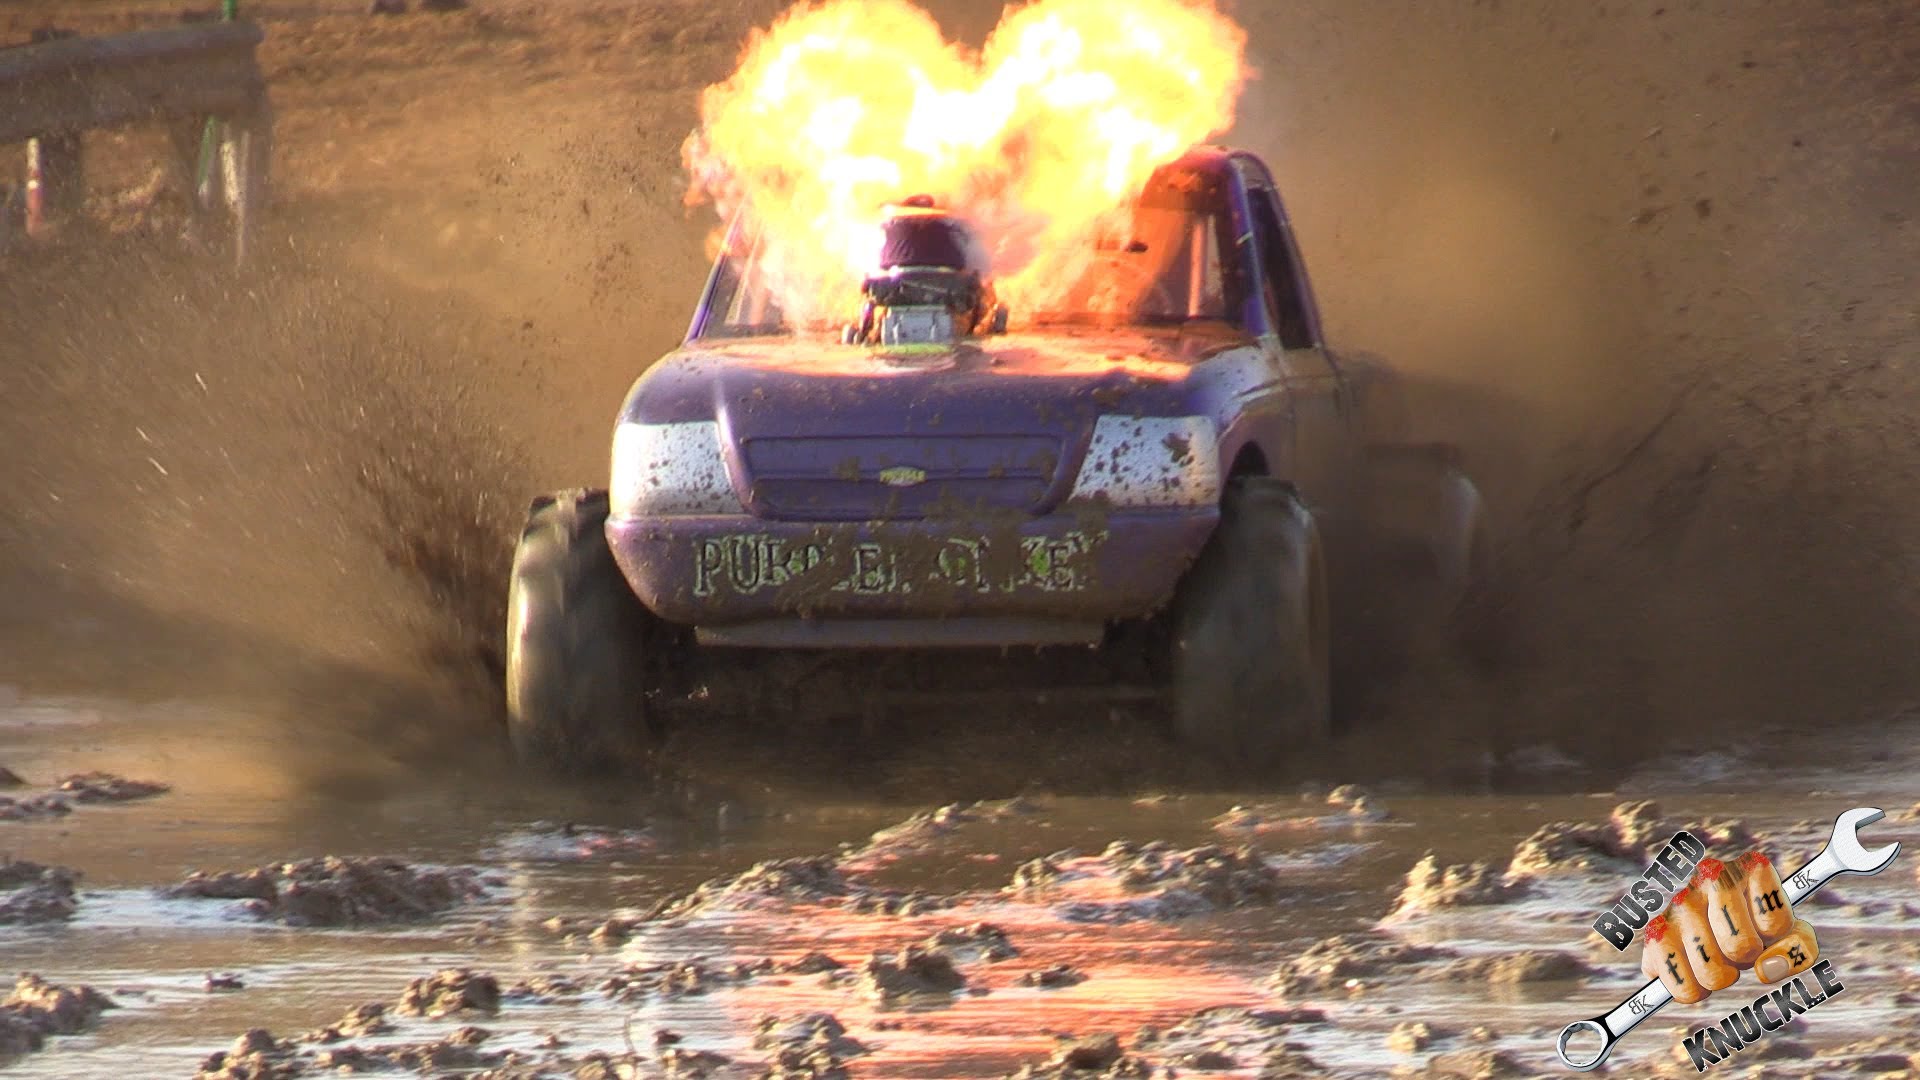 Mud Outlaws Wide Open Throttle | Busted Knuckle Films